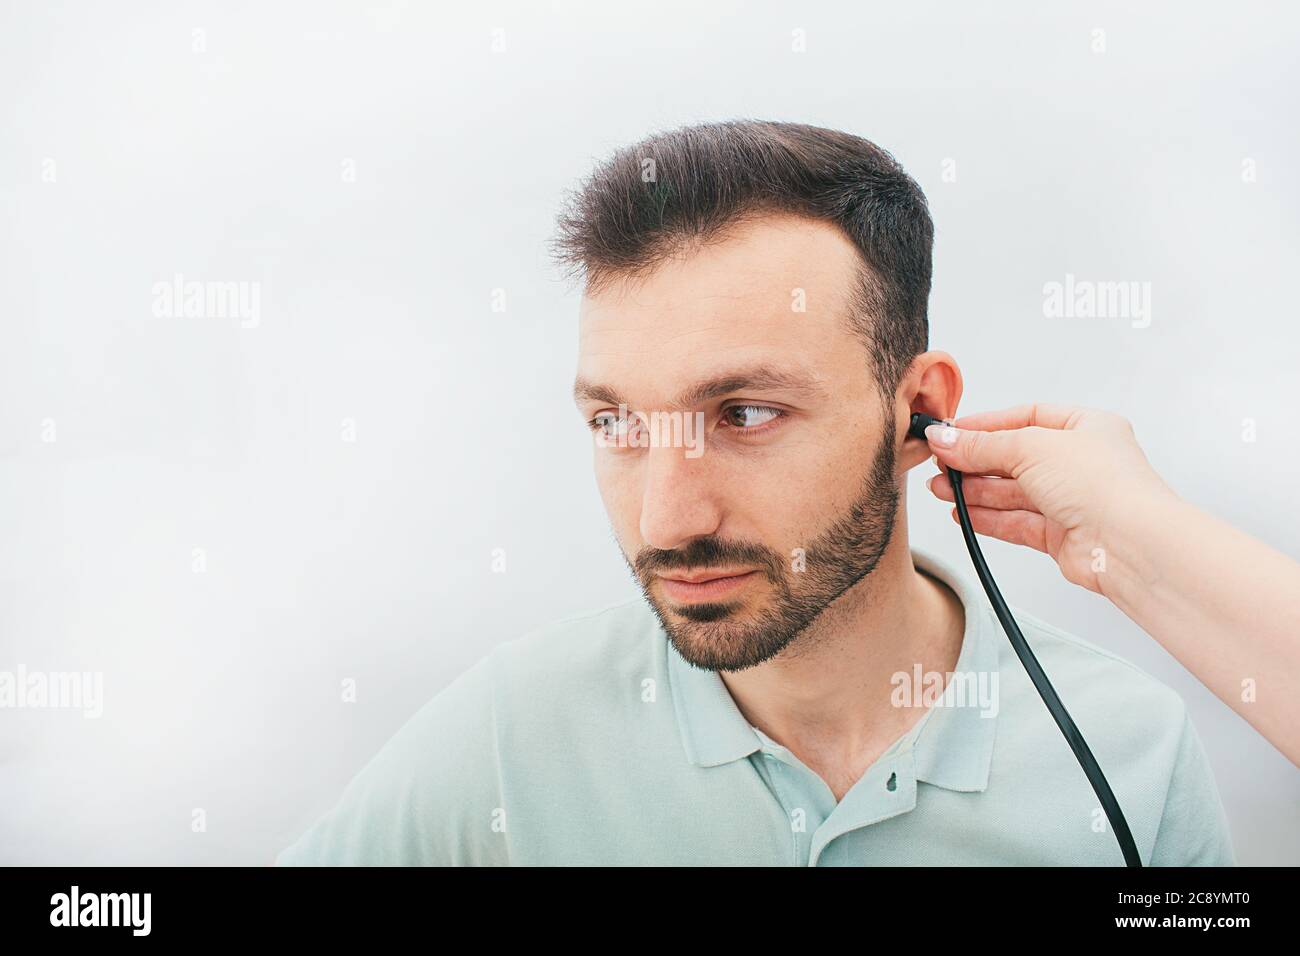 Mixed race man having a hearing test with special medical equipment. Impedance audiometry, tympanometry in a hearing center Stock Photo